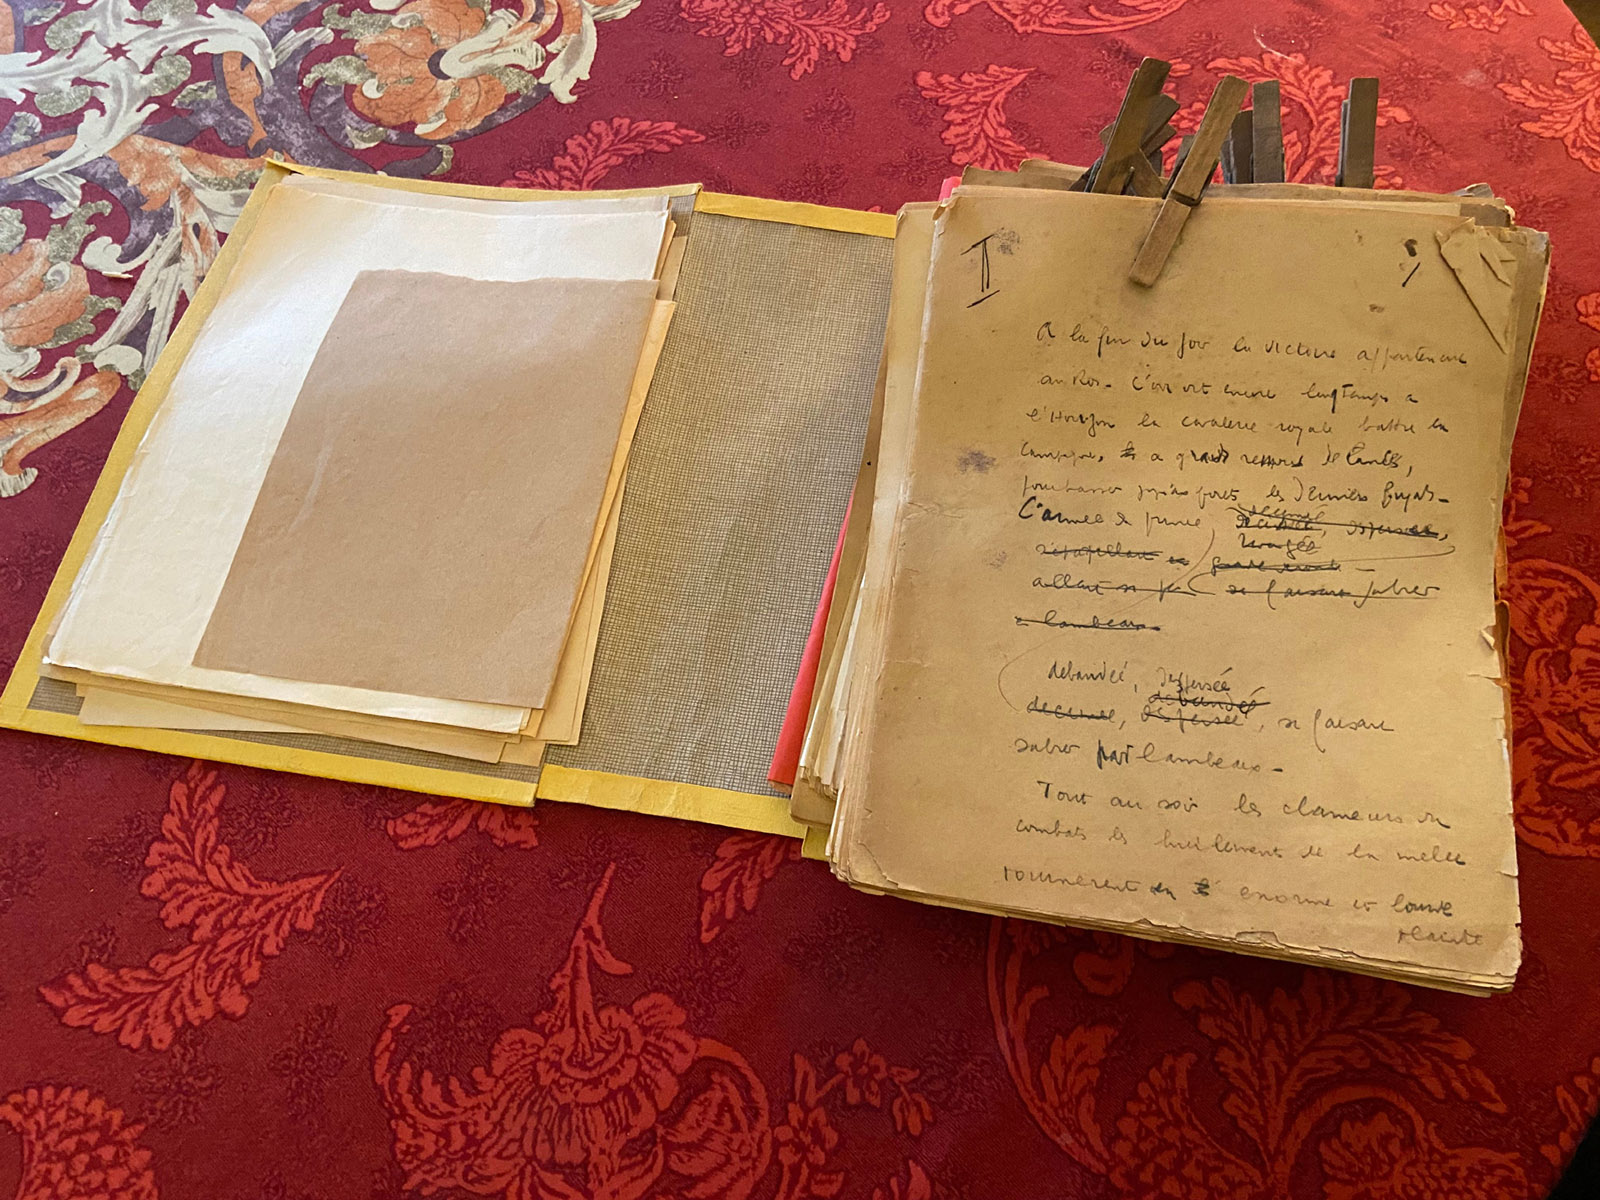 Pages from the Céline manuscripts that the journalist Jean-Pierre Thibaudat had been secretly holding